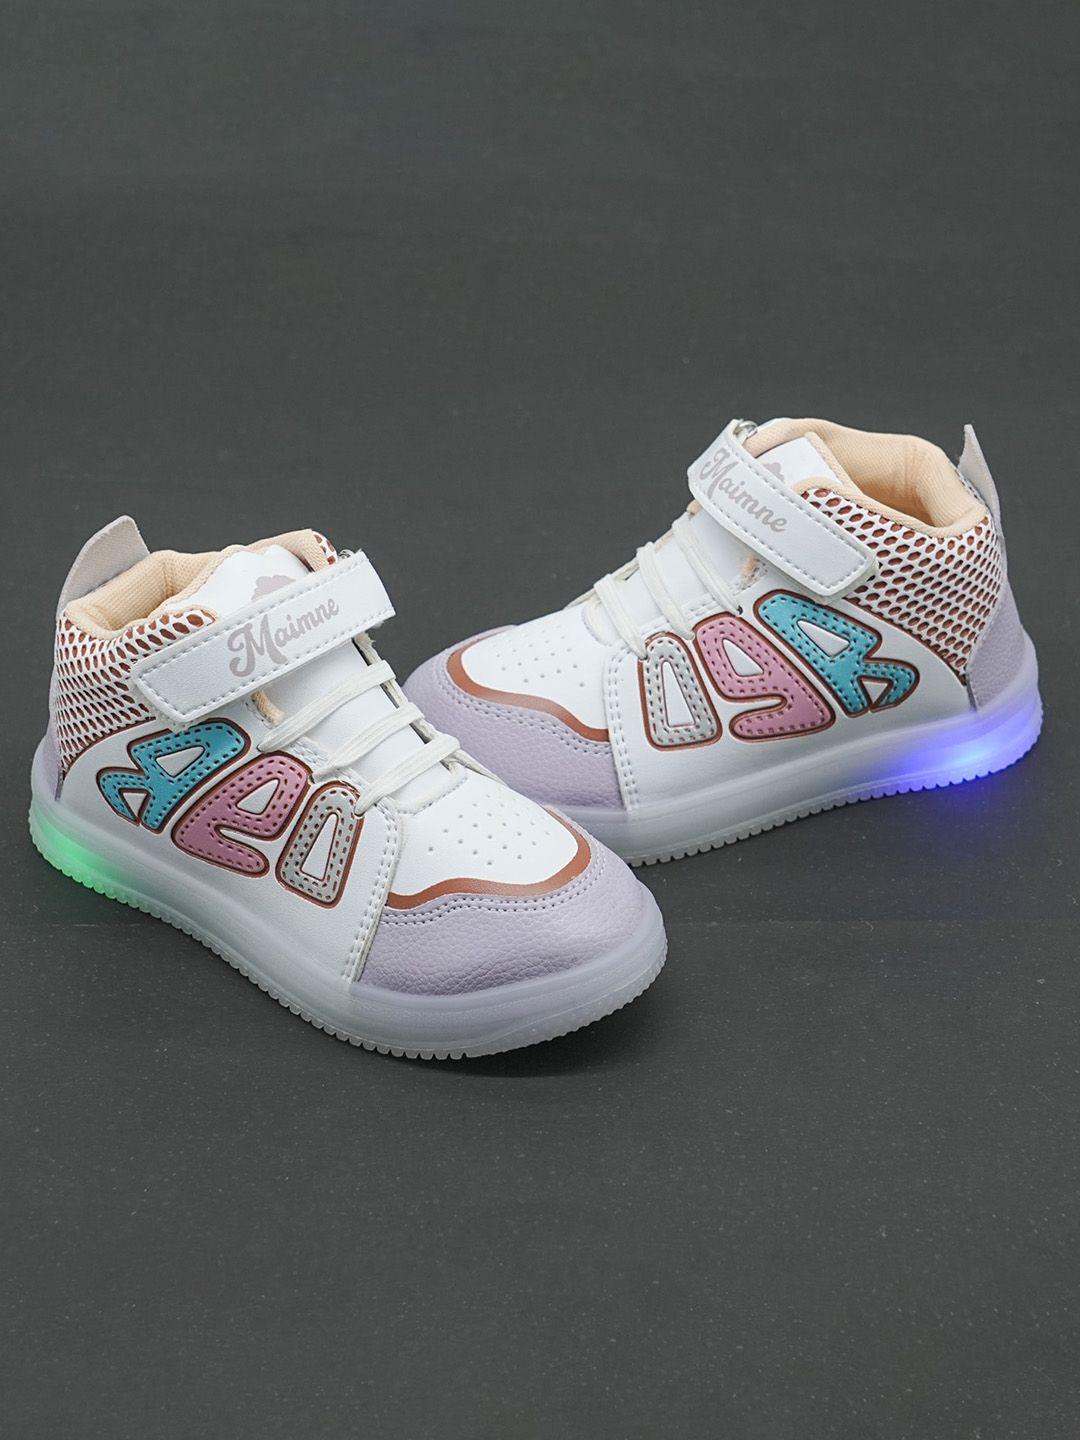 feetwell shoes kids colourblocked comfort insole sneakers with led lights